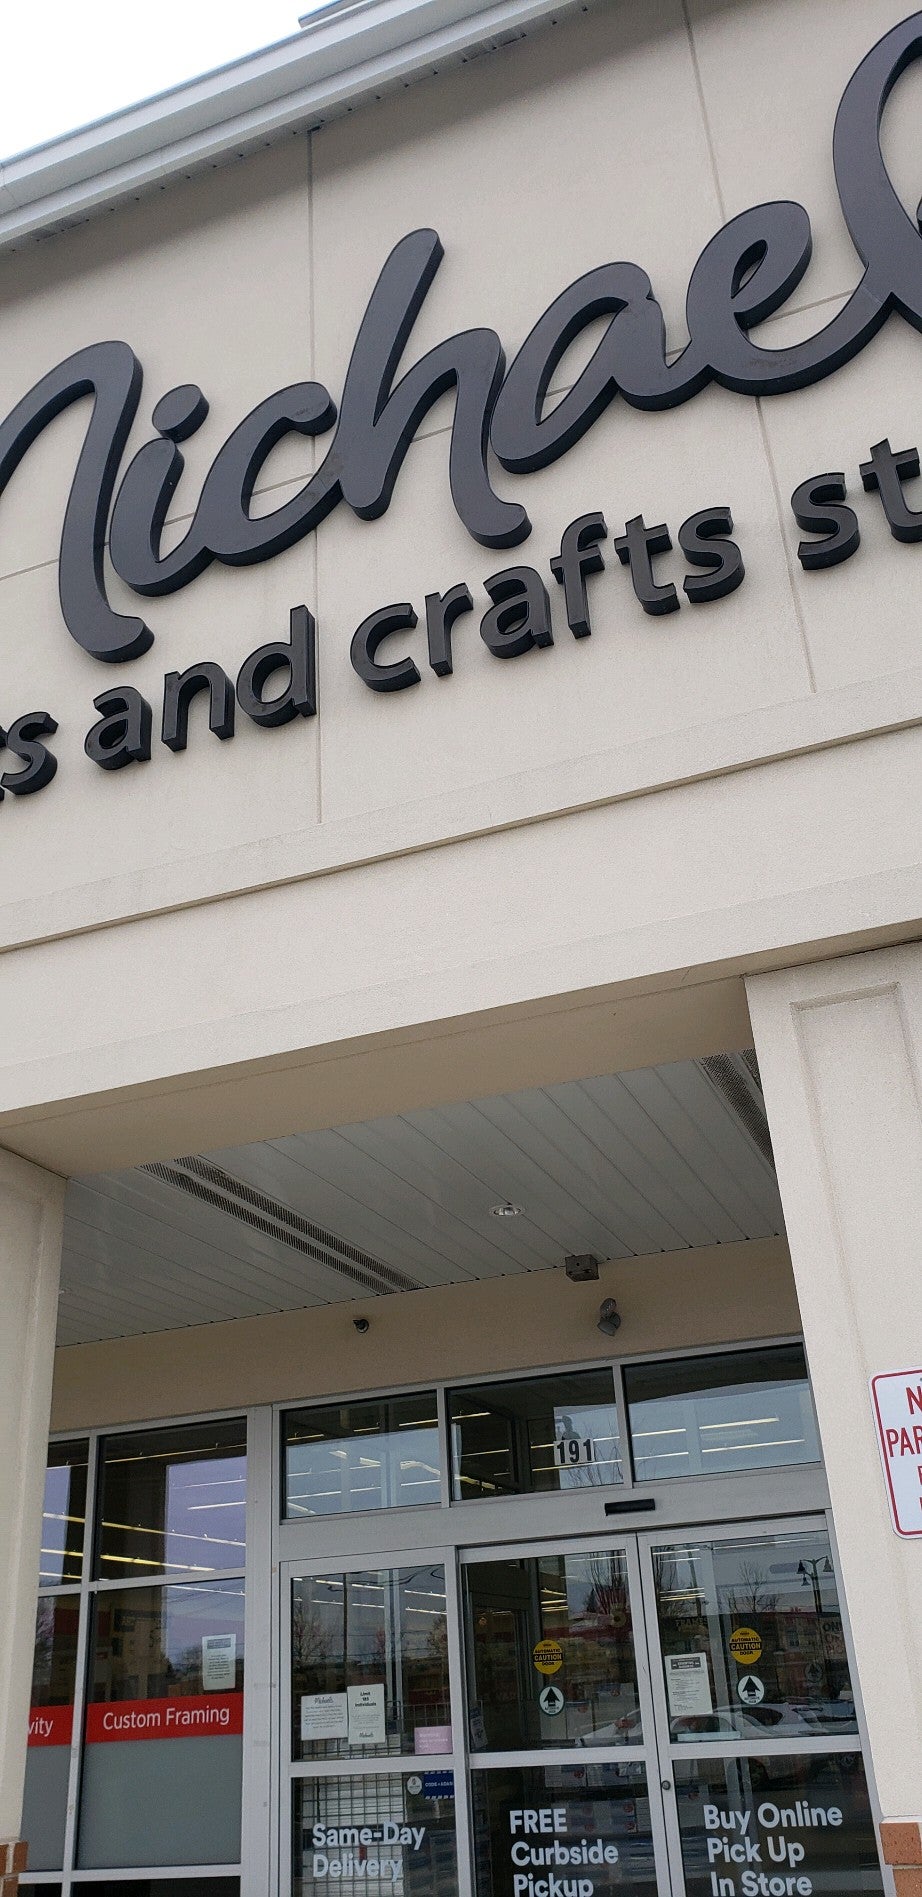 Michaels Craft Store Moorestown Mall Location Opens Feb 28, Replacing the  East Gate Store - 42 Freeway